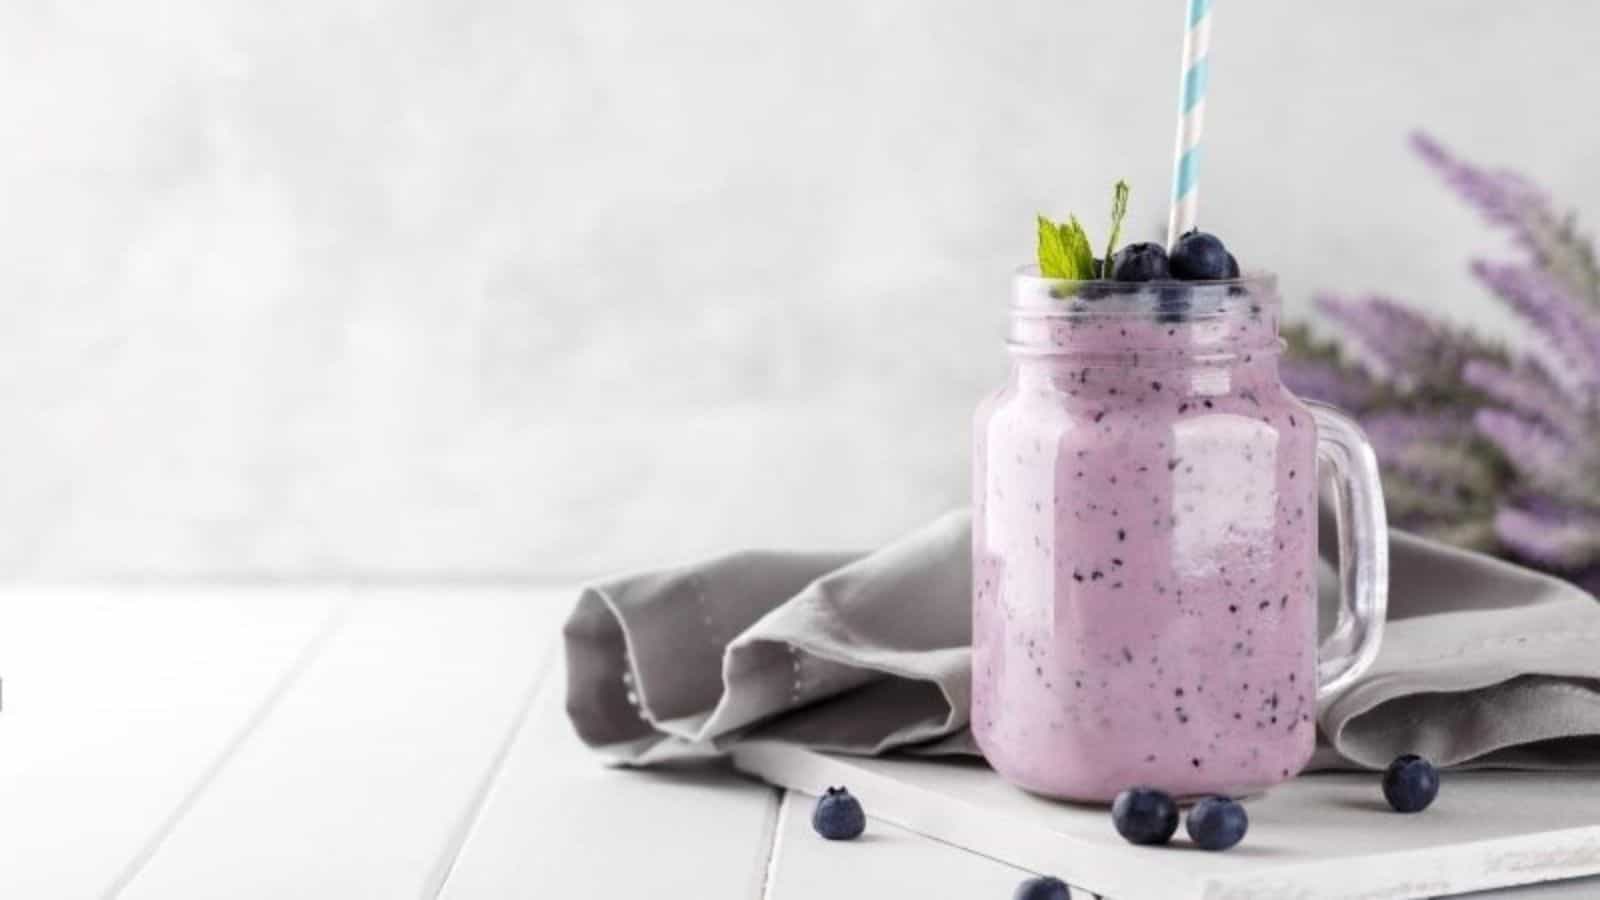 <p>Lazy mornings meet health-conscious choices with the Blueberry Avocado Boost Smoothie. Blend your way to a nutritious breakfast that’s as simple as it is delicious. Enjoy the creamy blend of blueberries and avocado without the fuss.<br><strong>Get the Recipe: </strong><a href="https://www.primaledgehealth.com/blueberry-avocado-ketogenic-smoothie/?utm_source=msn&utm_medium=page&utm_campaign=18 extremely quick and easy breakfast ideas for lazy people">Blueberry Avocado Boost Smoothie</a></p>